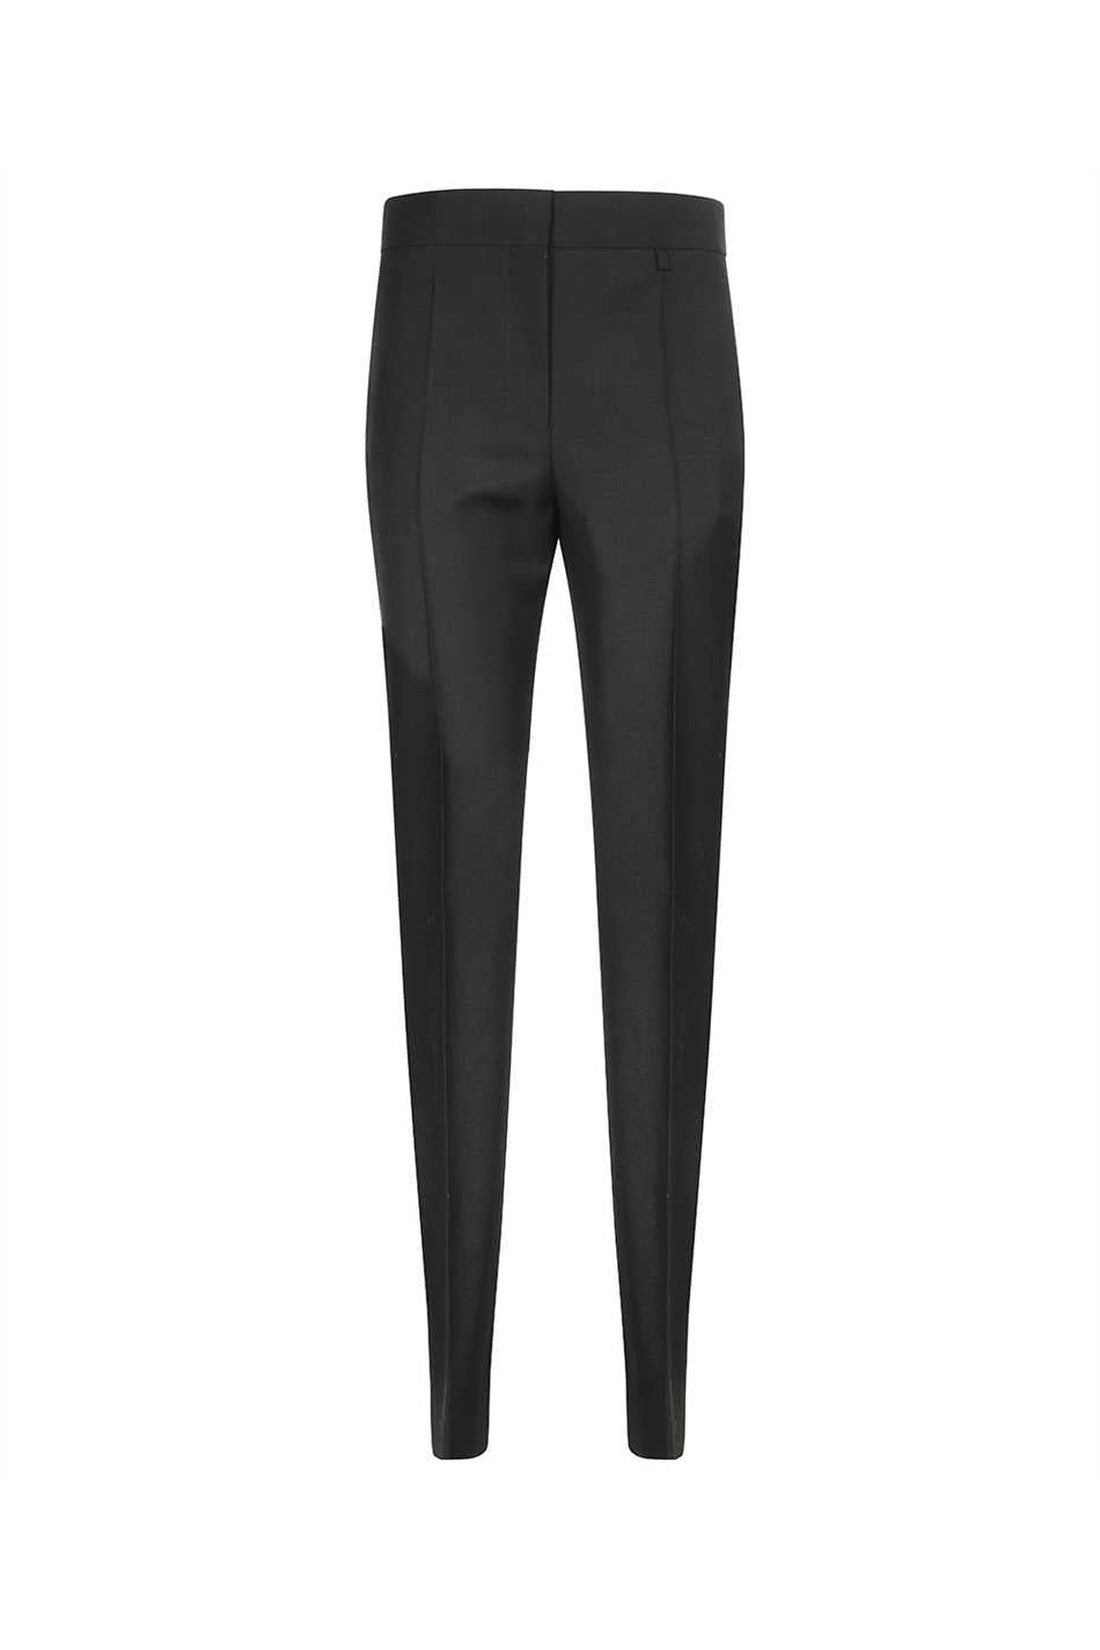 Wool blend trousers-Givenchy-OUTLET-SALE-34-ARCHIVIST